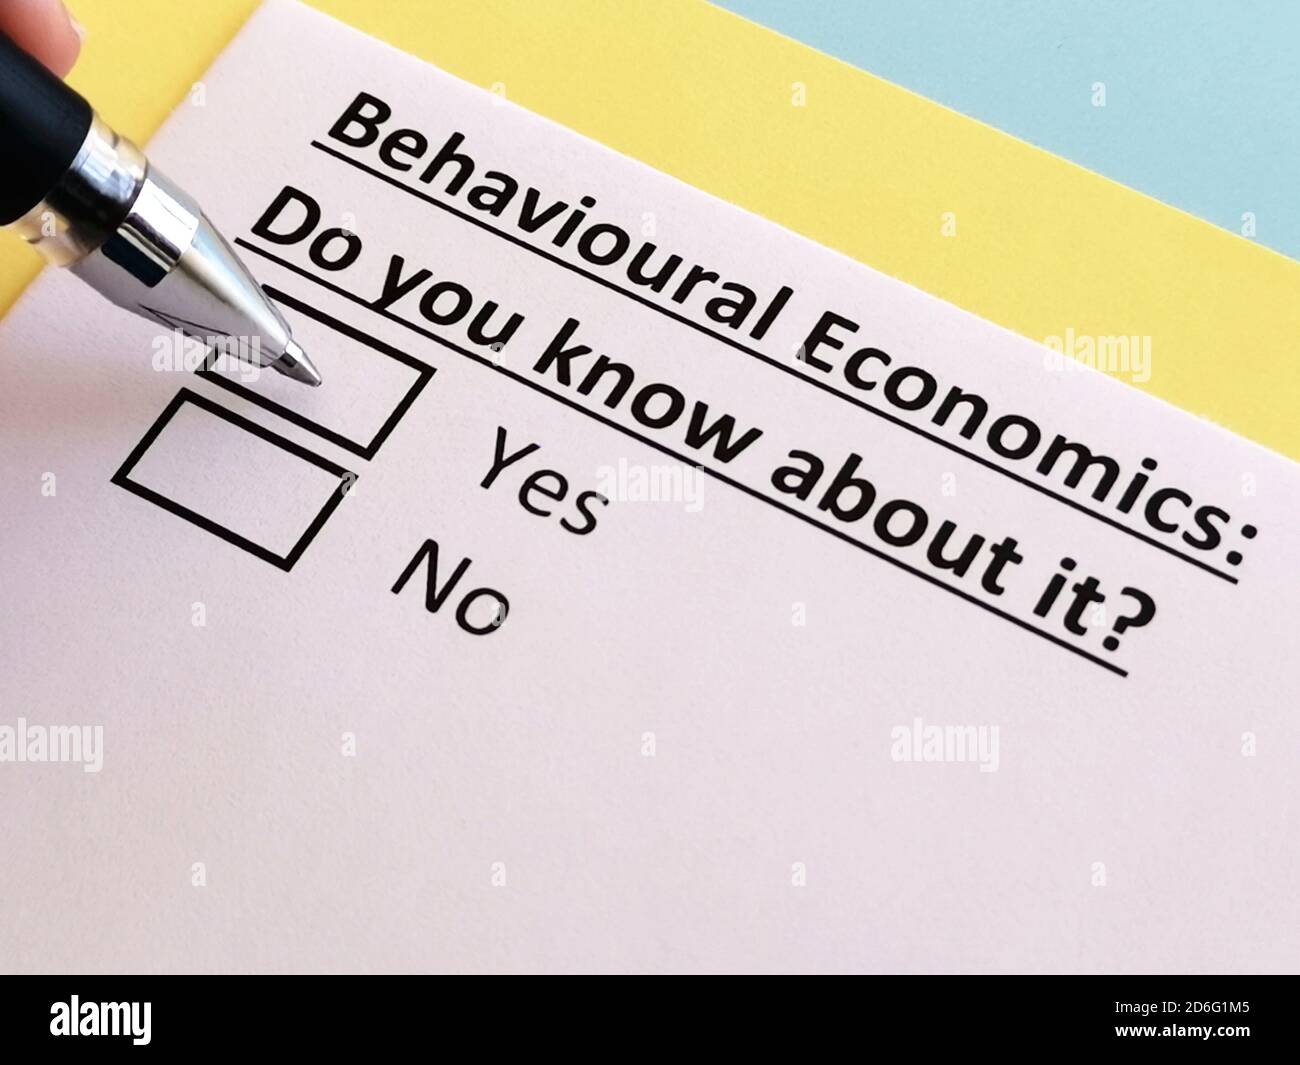 One person is answering quetion about behavioural economics. Stock Photo